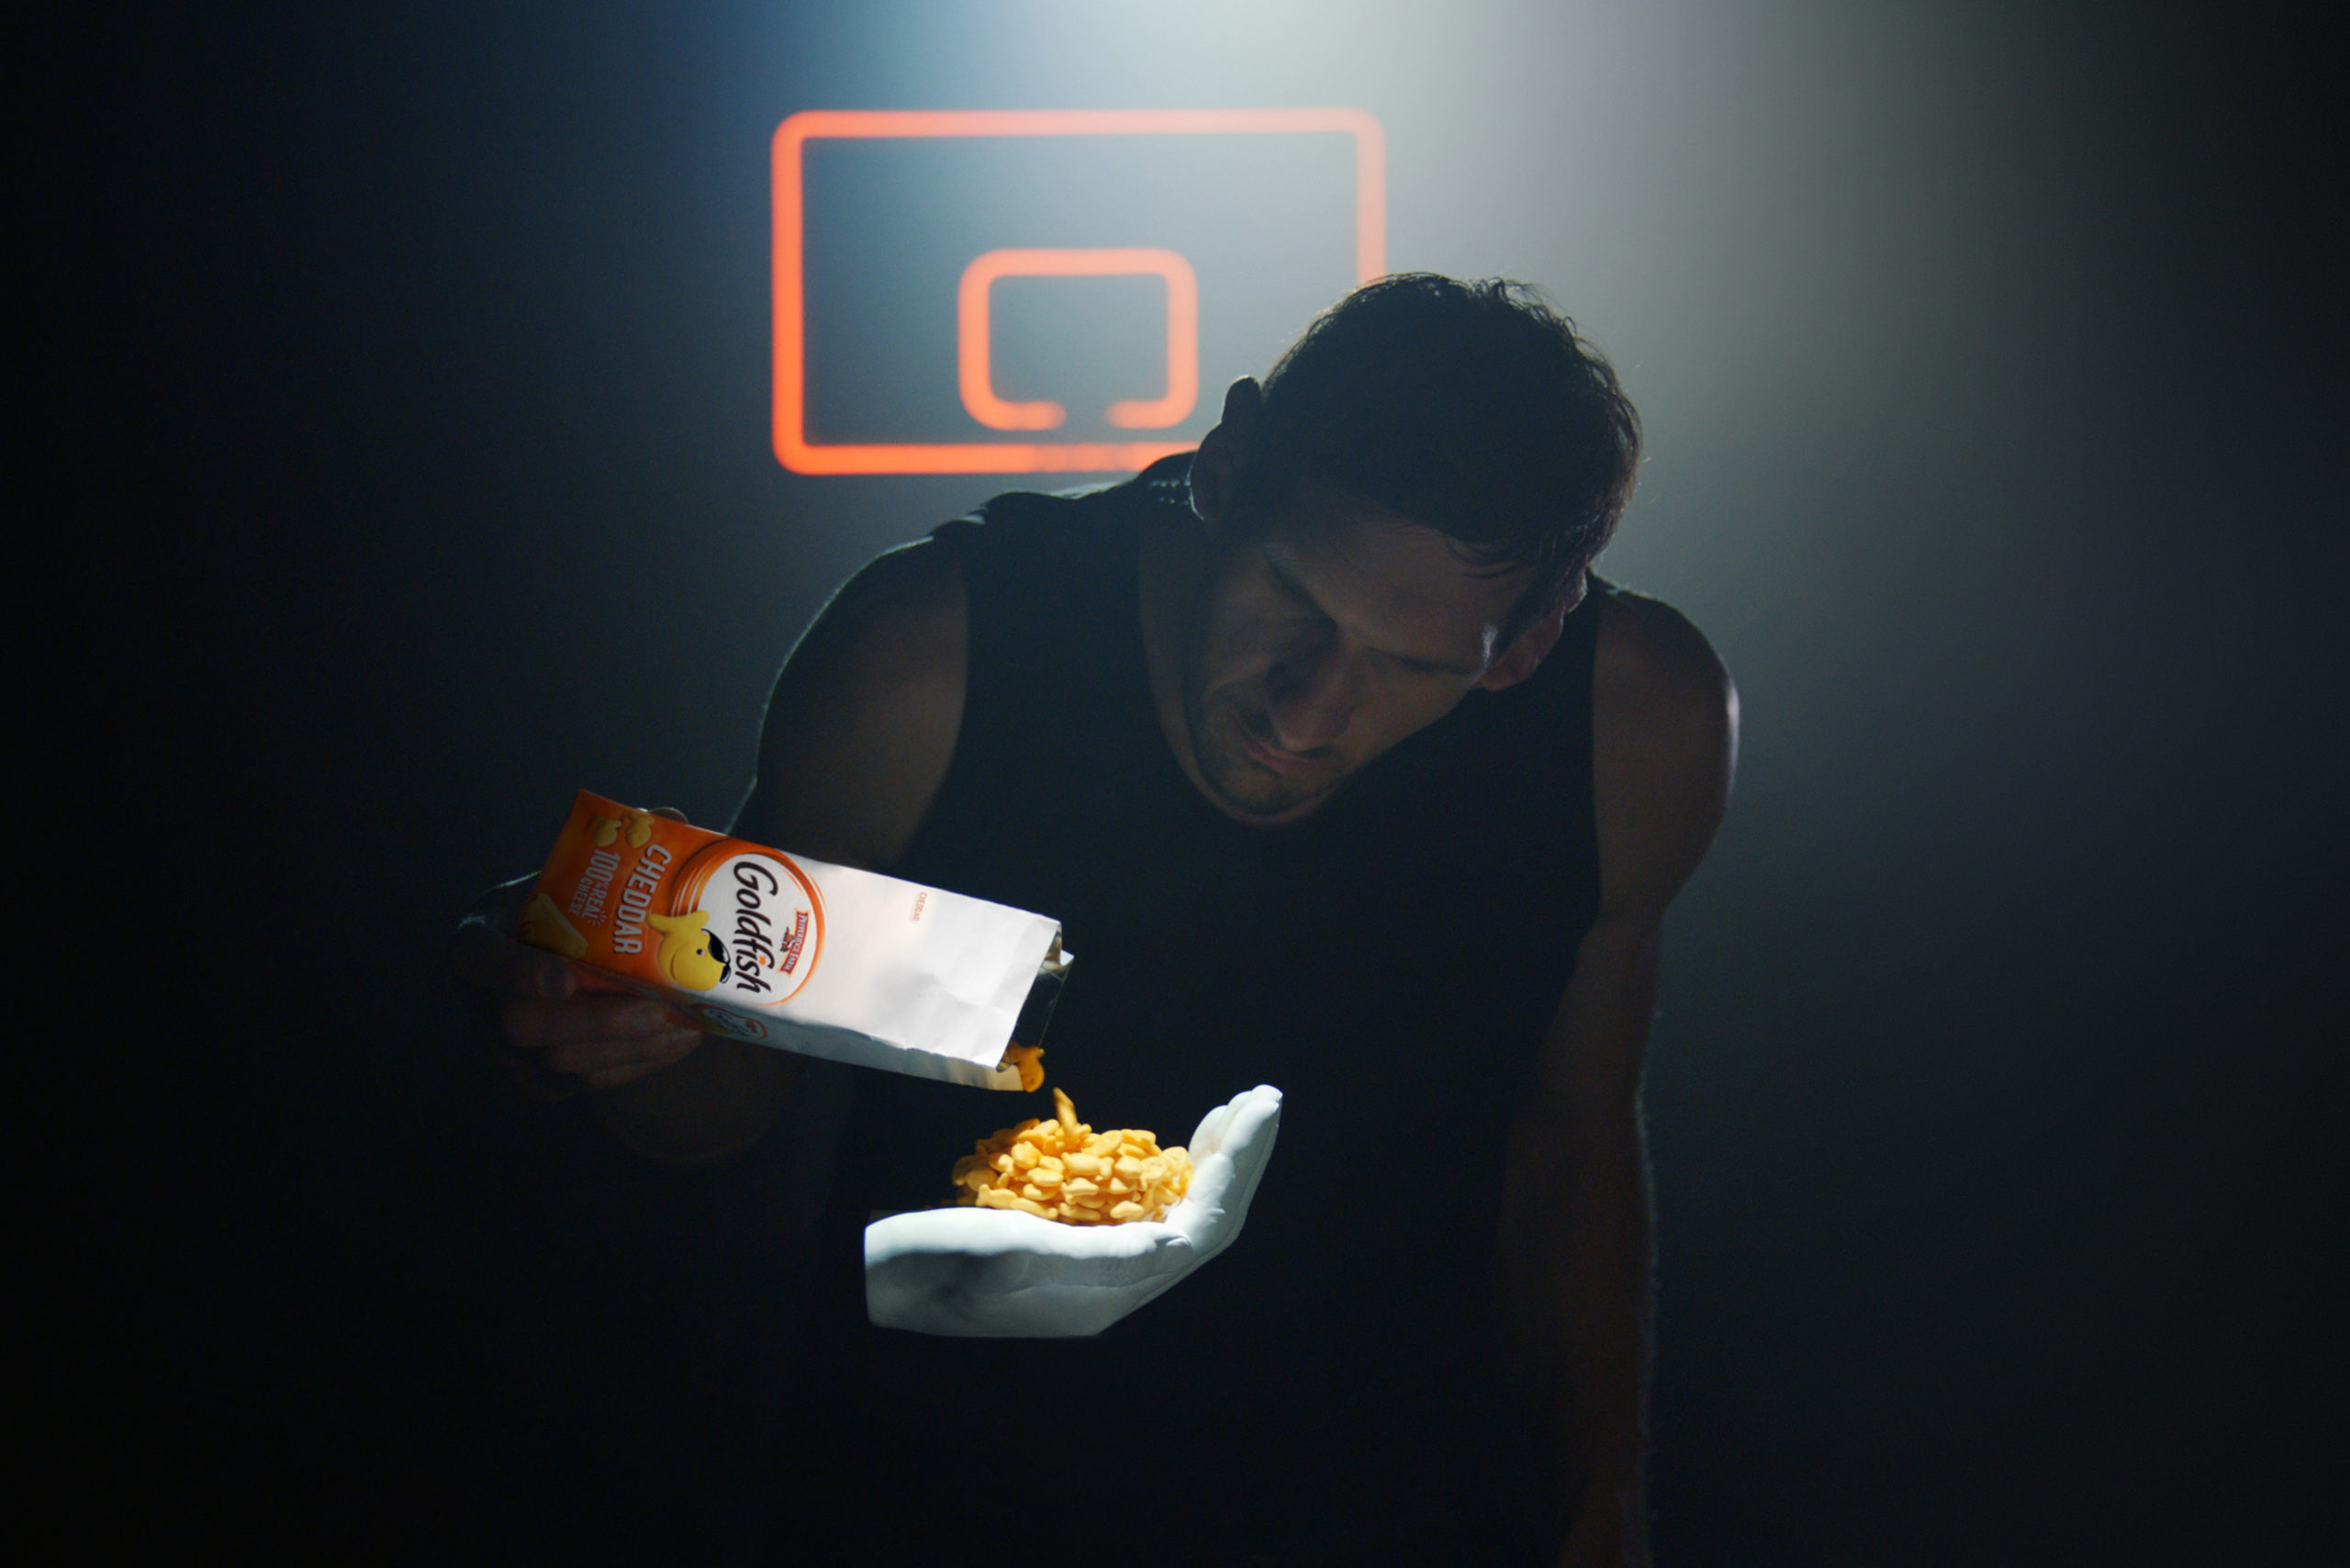 Goldfish introduces 'Tiny Hands' campaign with NBA stars